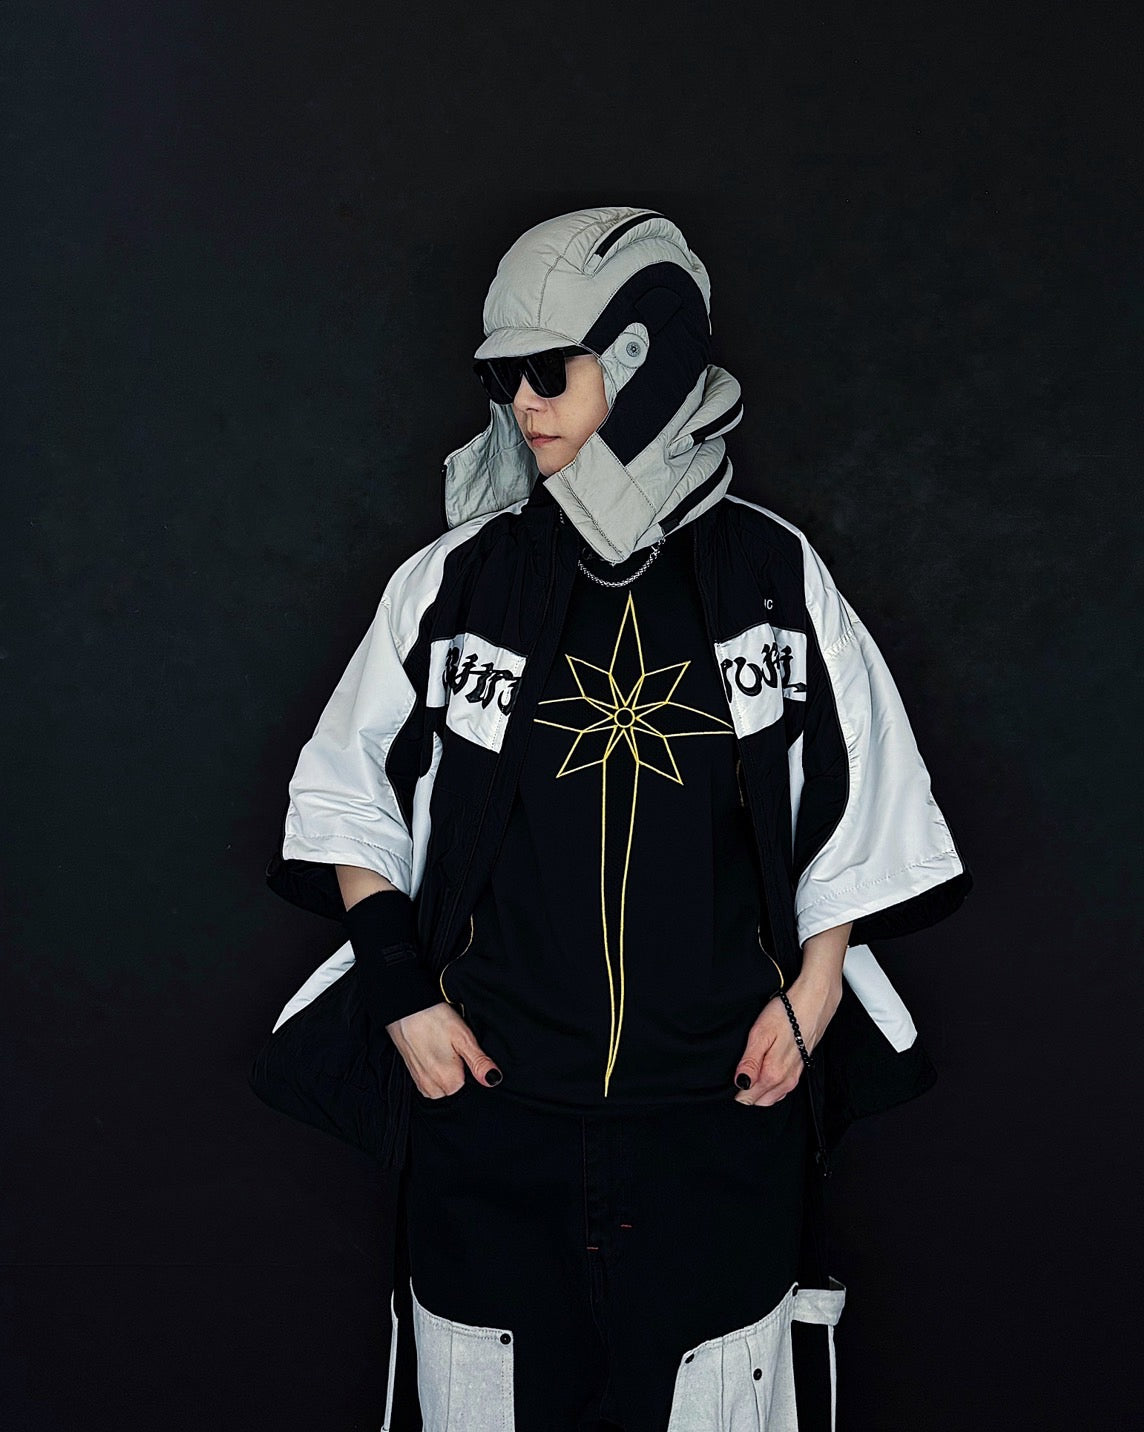 【KUSIKOHC】<br> The long-awaited 24SS collection is now available!